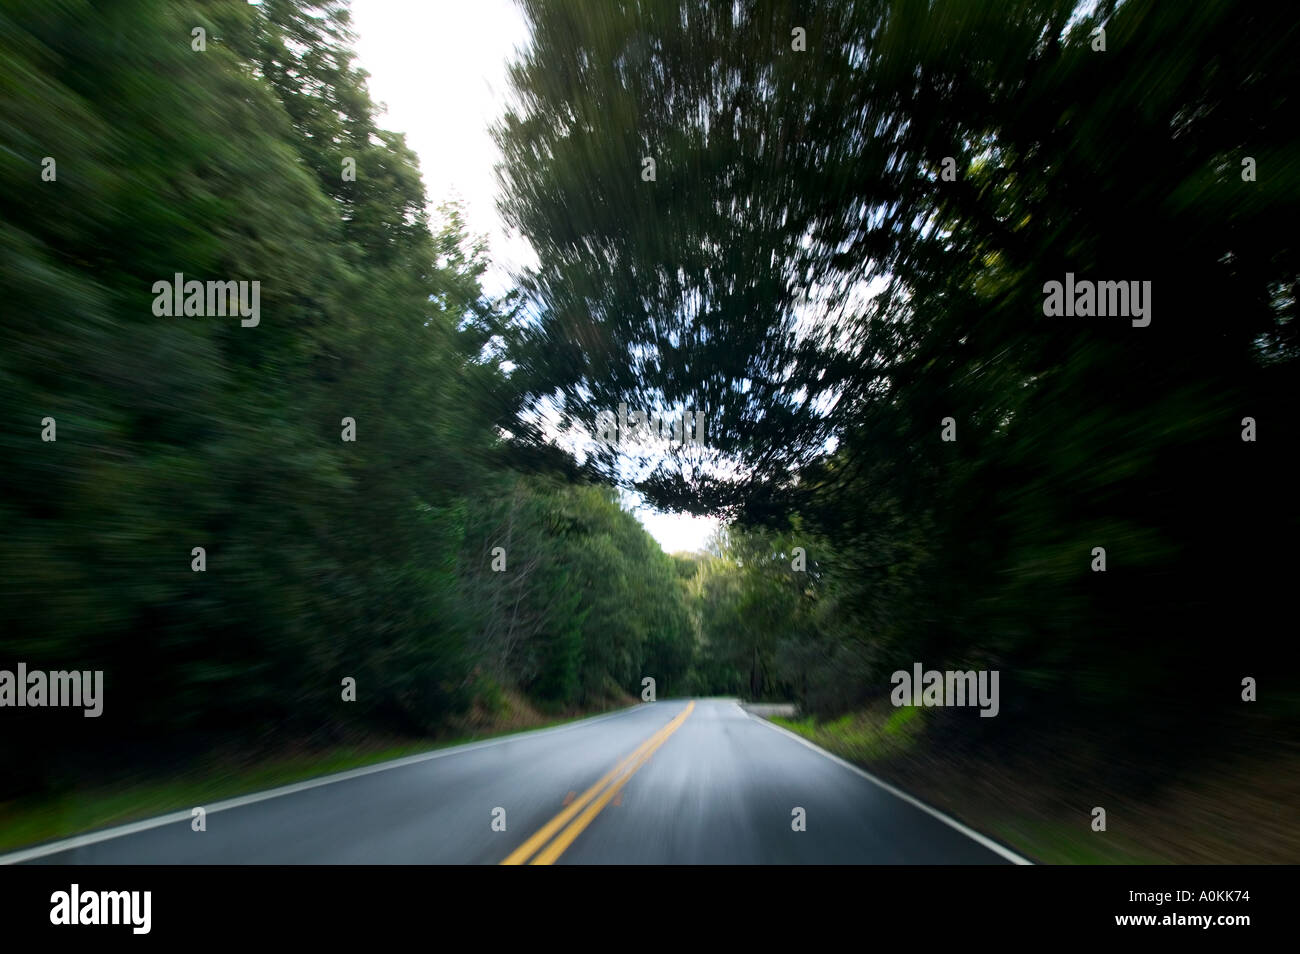 Blurred rural road through trees Stock Photo